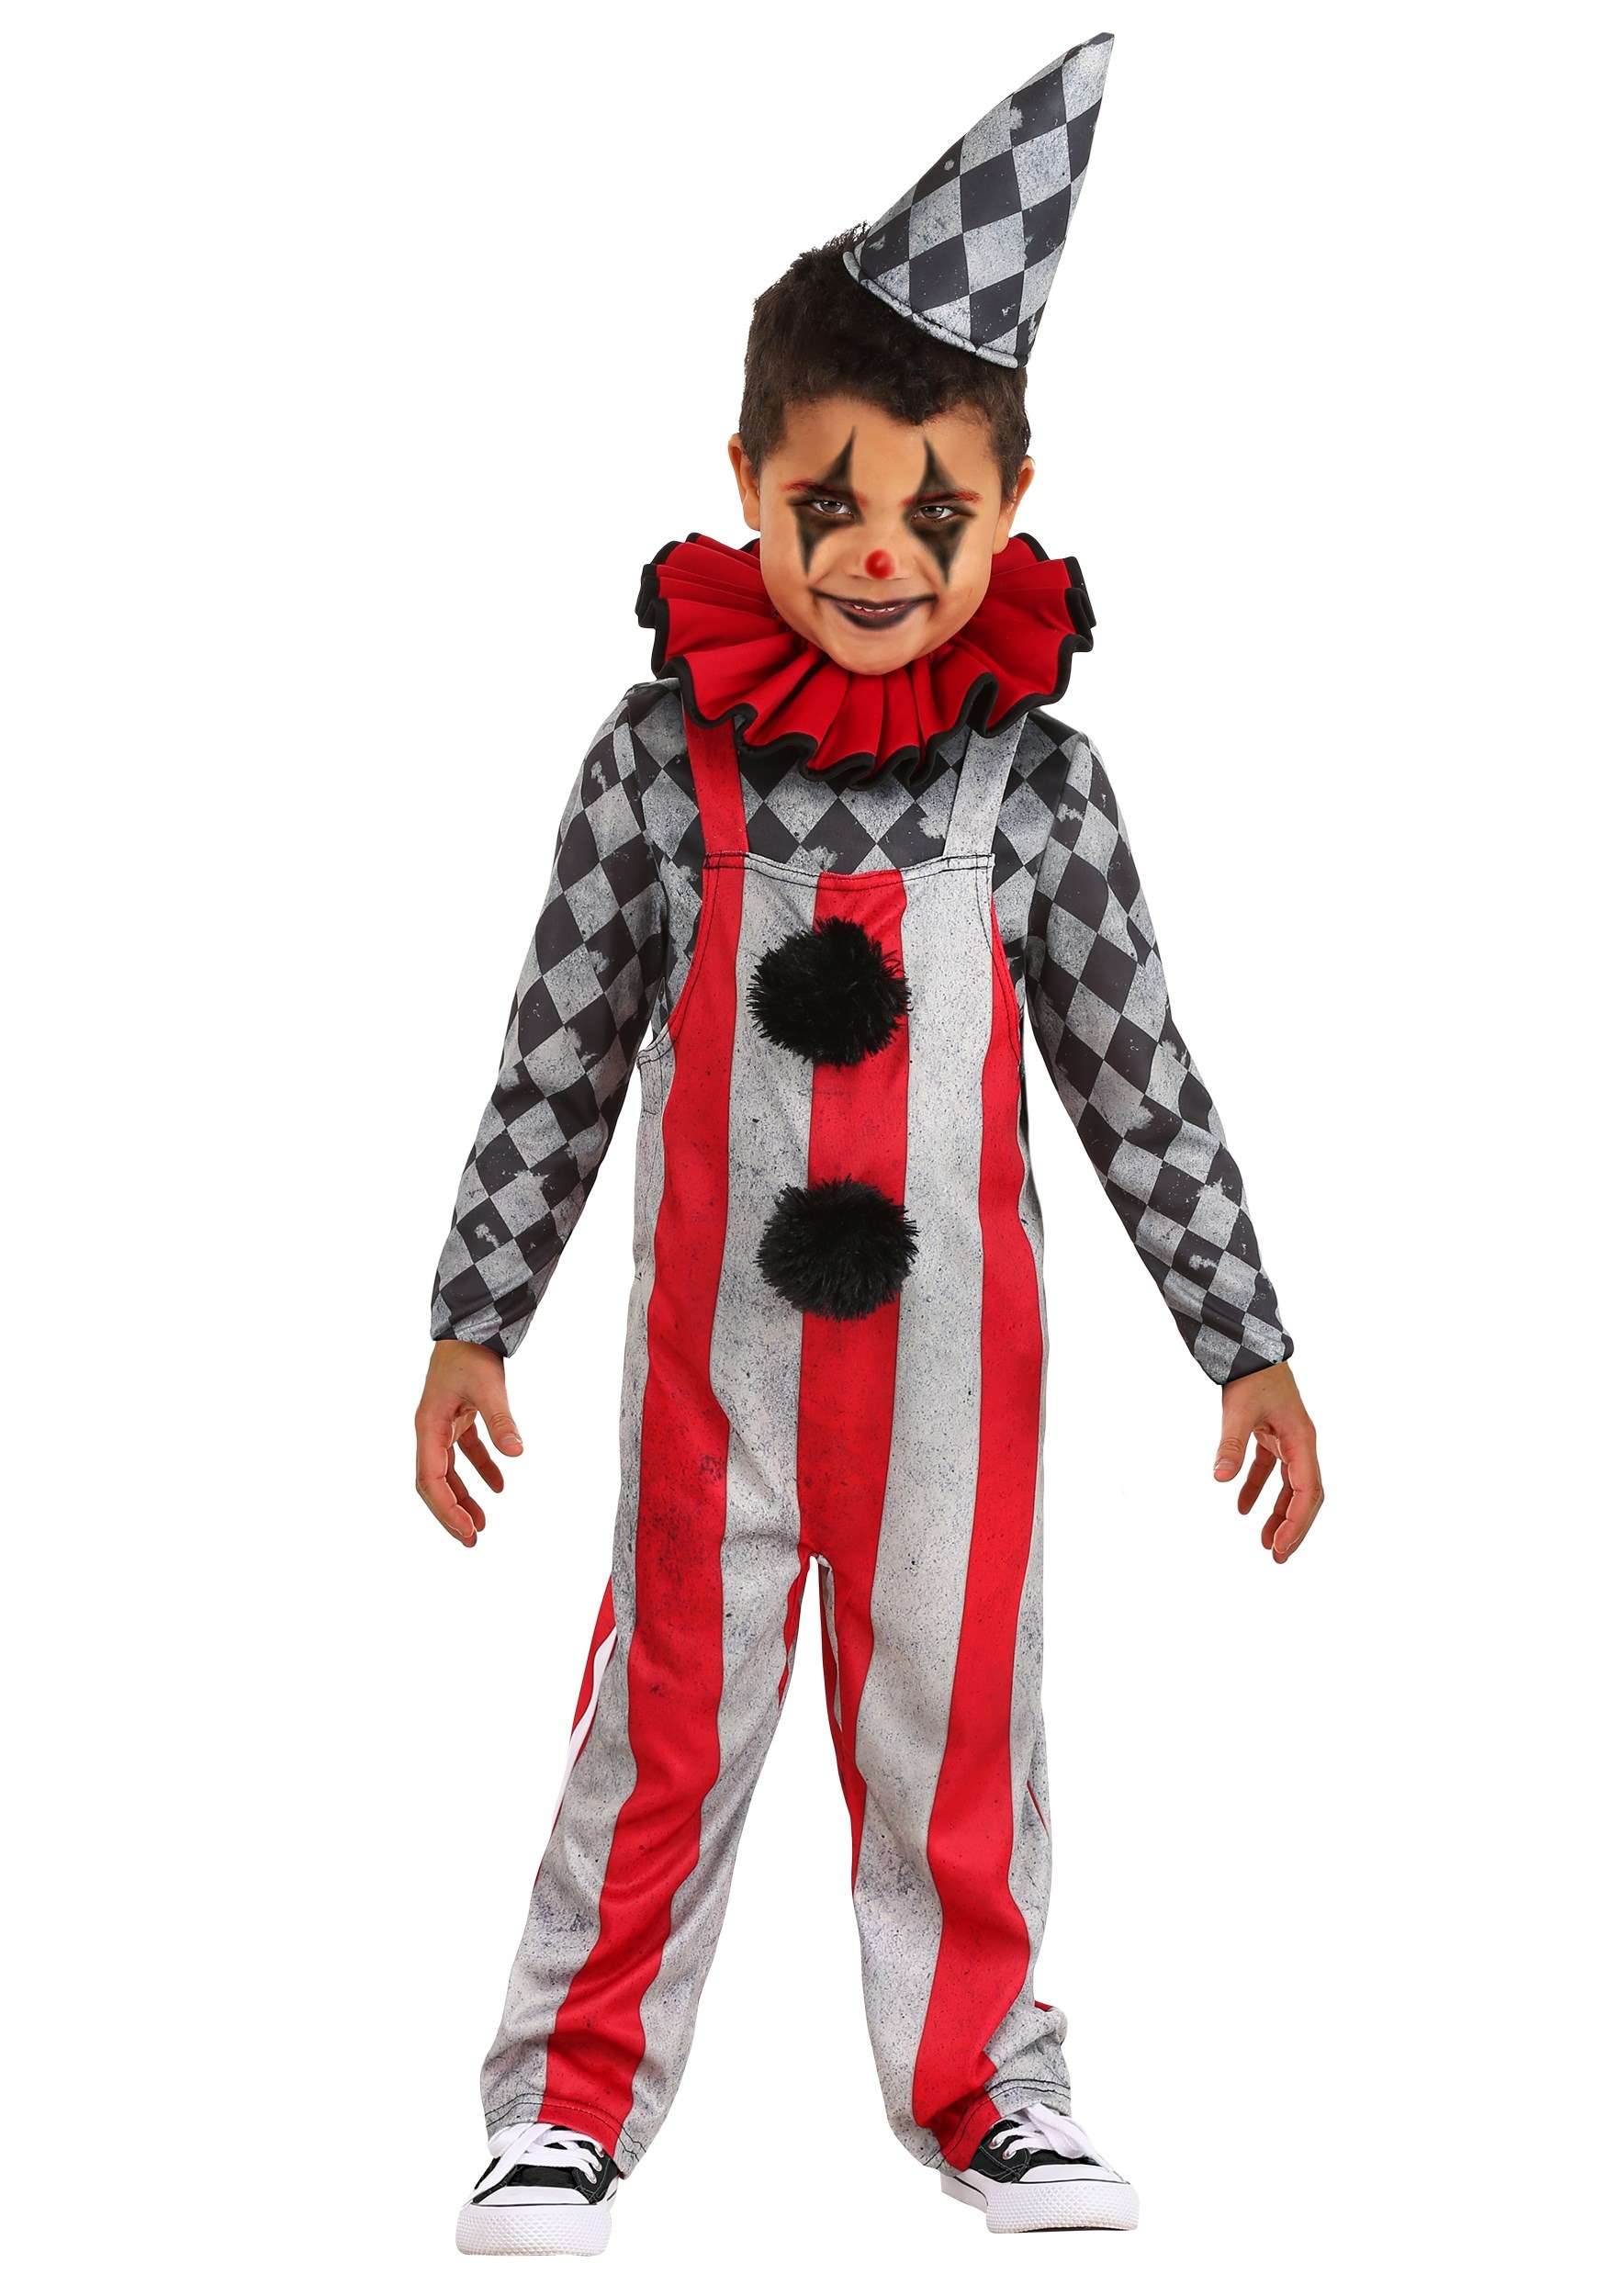 Photos - Fancy Dress Toddler FUN Costumes Wicked Circus Clown  Costume Black/Red/Gray FU 